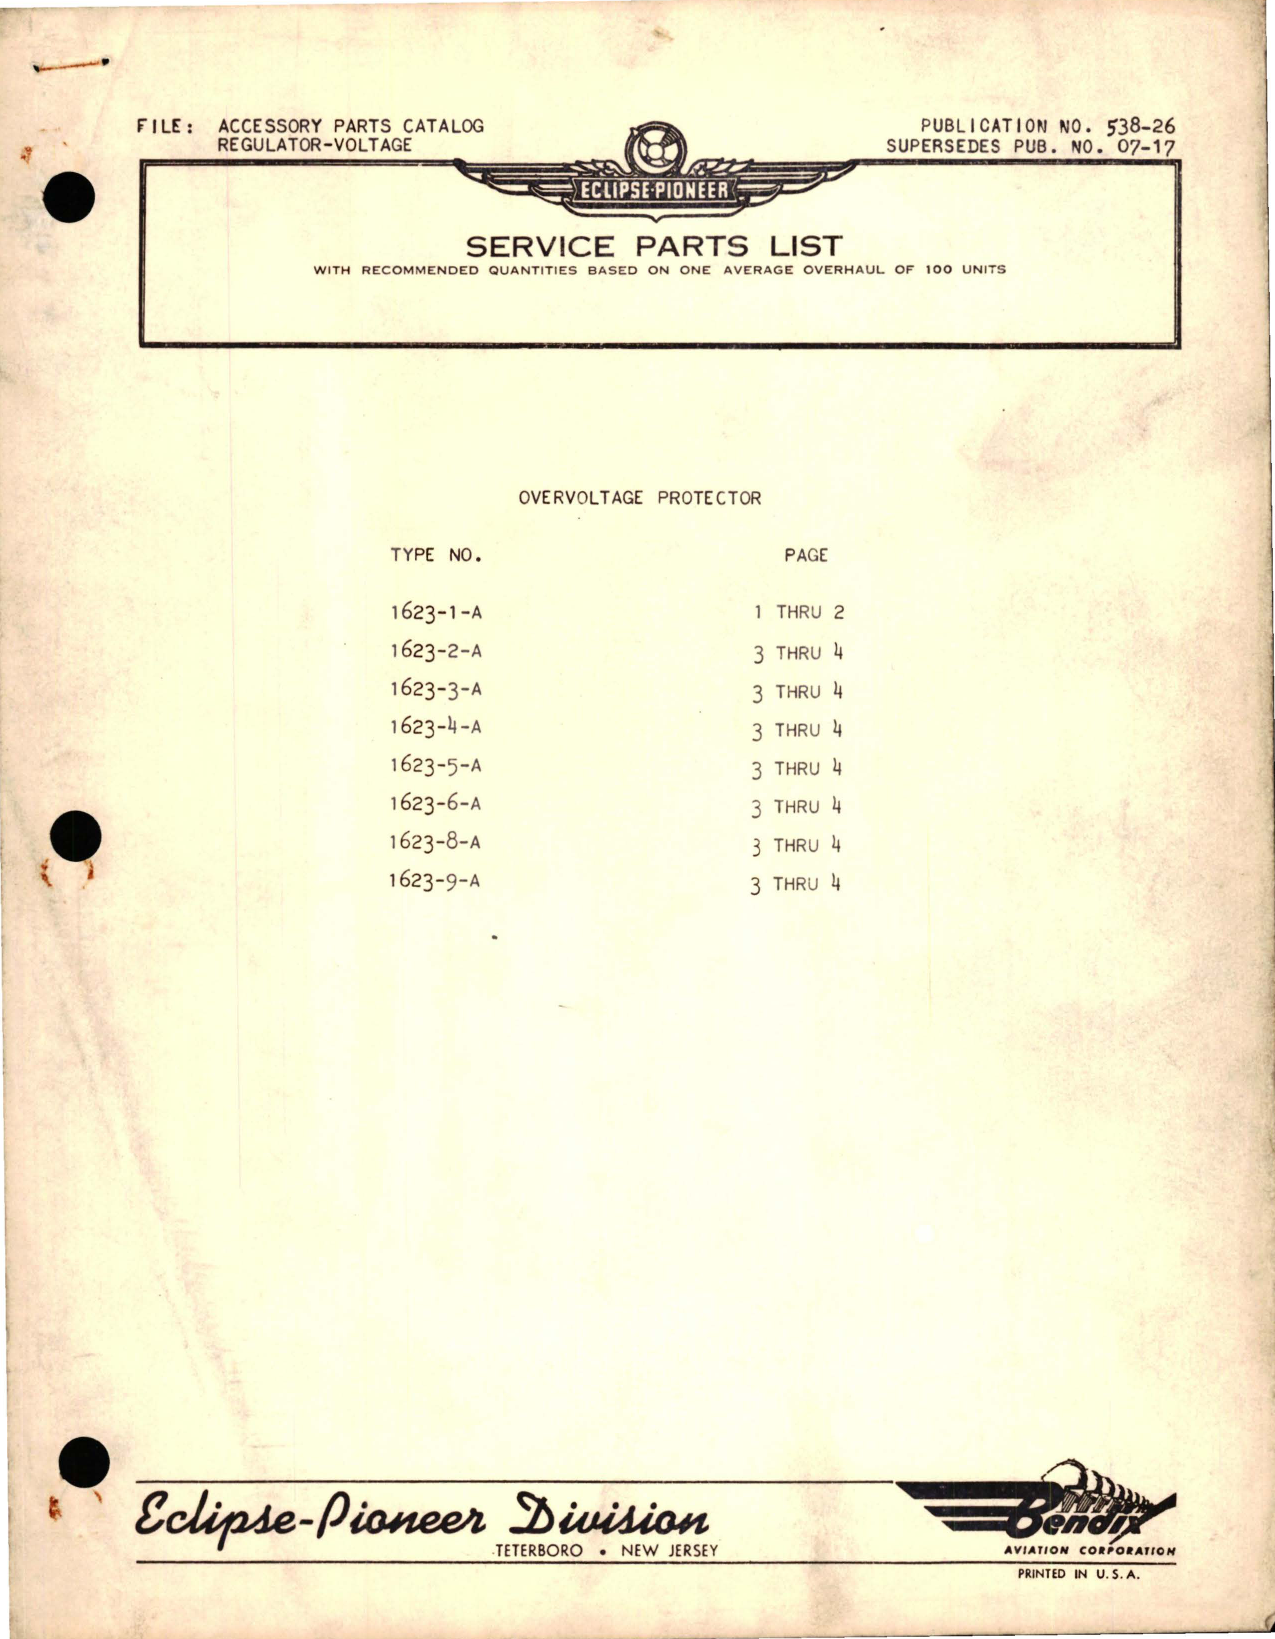 Sample page 1 from AirCorps Library document: Service Parts List for Overvoltage Protector - Type 1623 Series